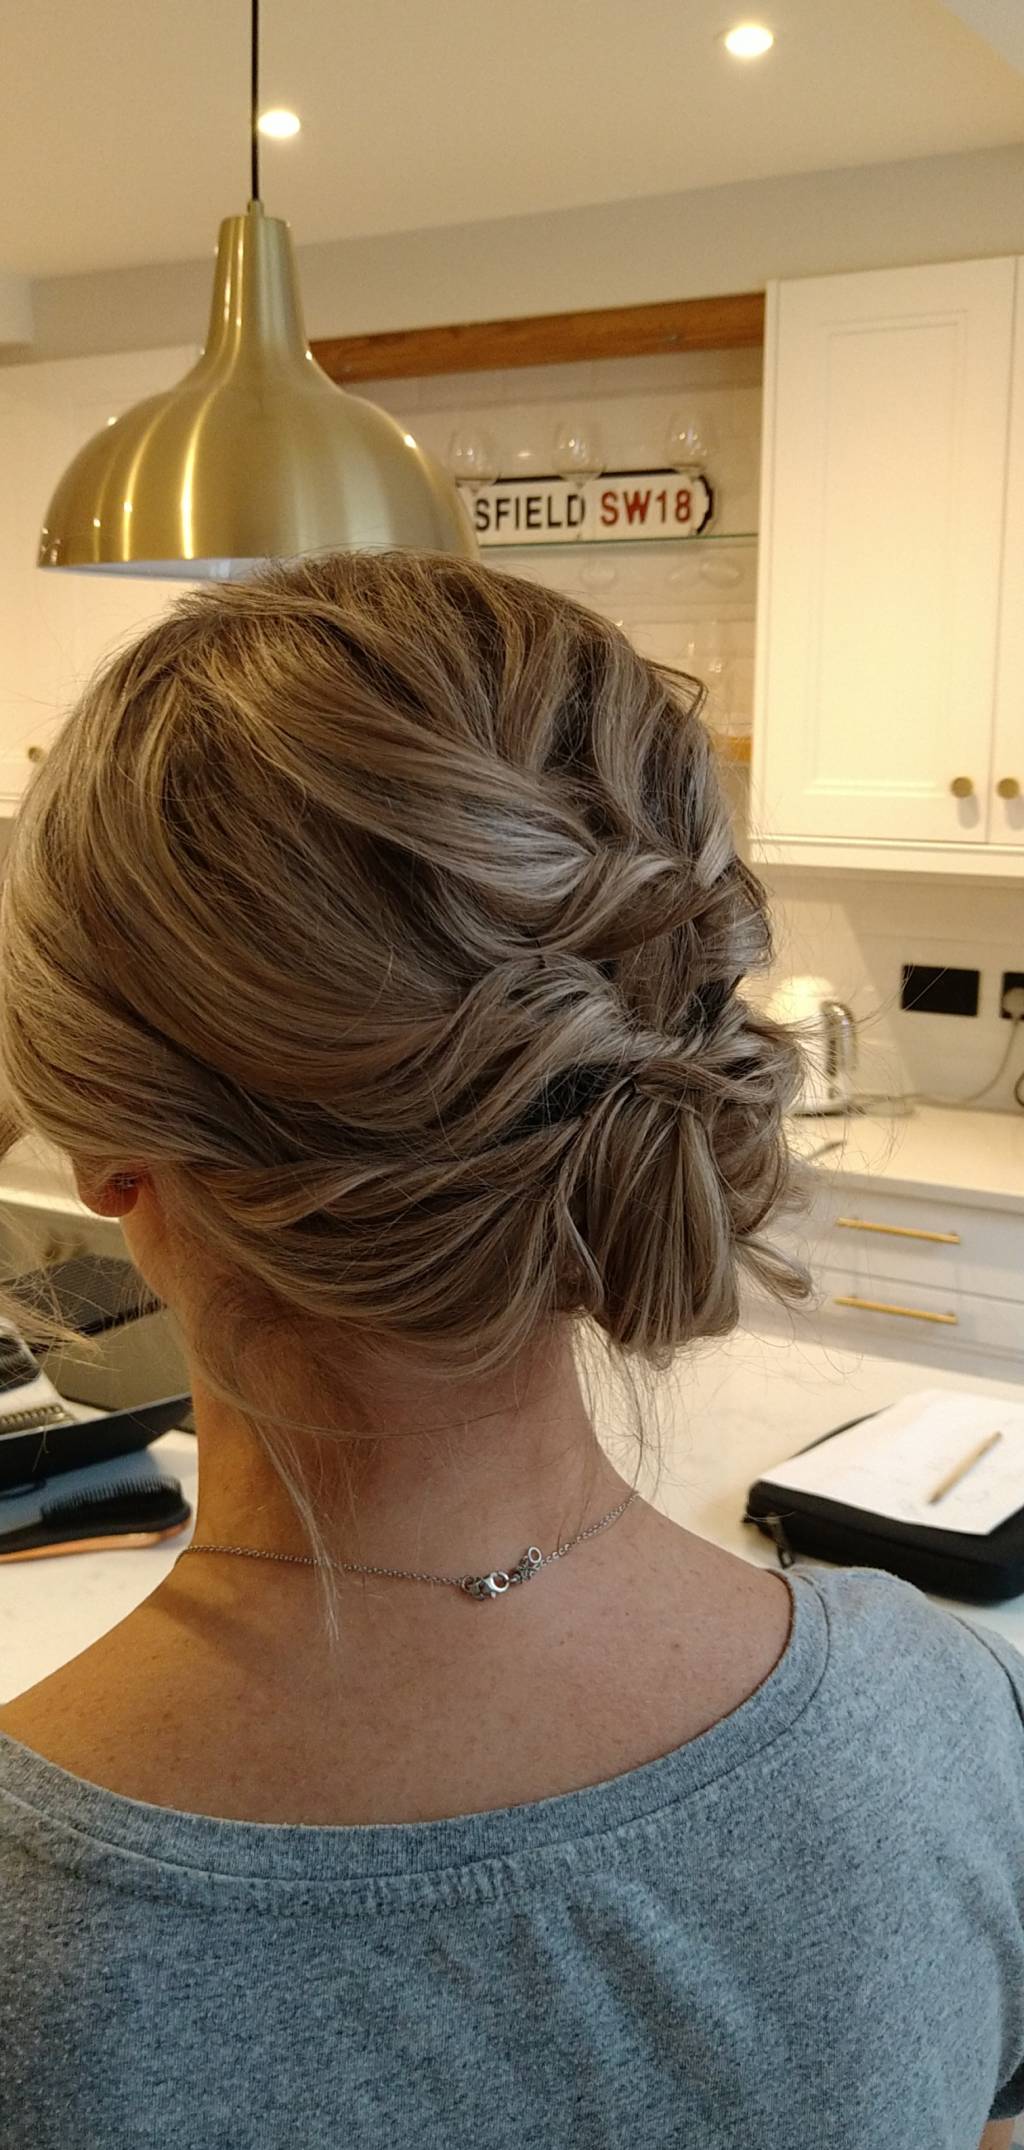  Updo / hair up